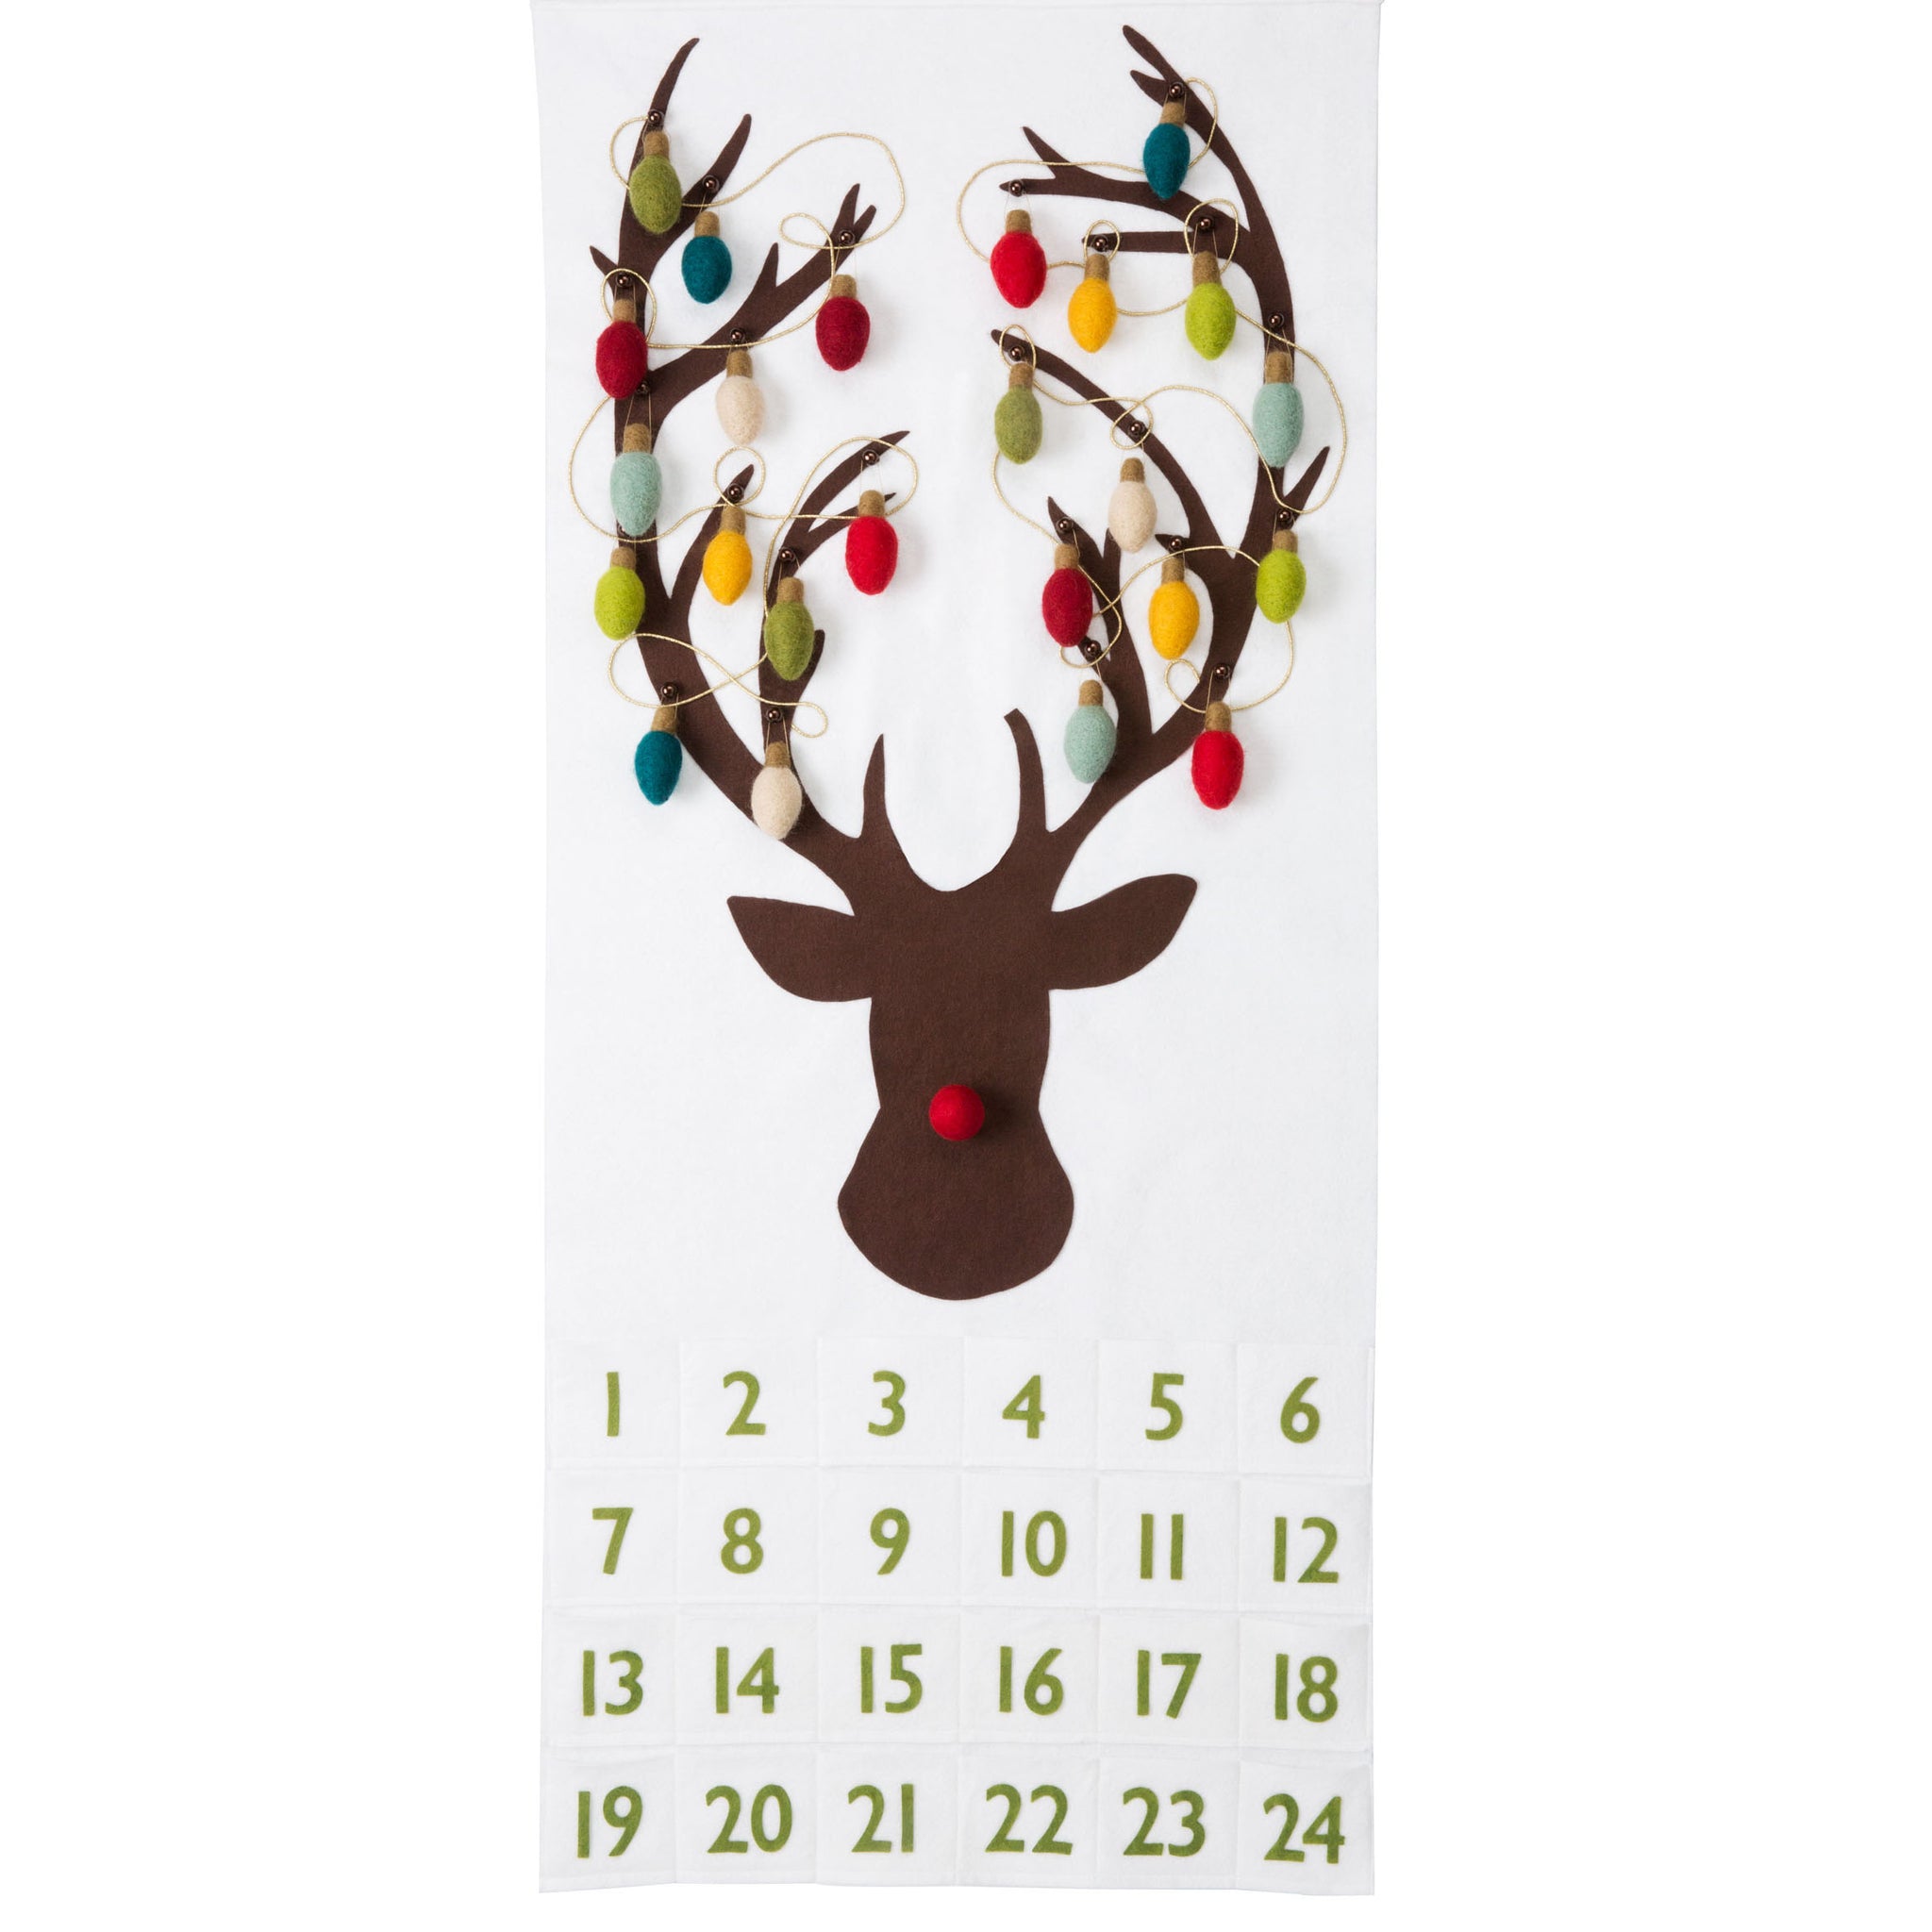 Rudolph The Red Nosed Reindeer Classic Lights Advent Calendar Pattern